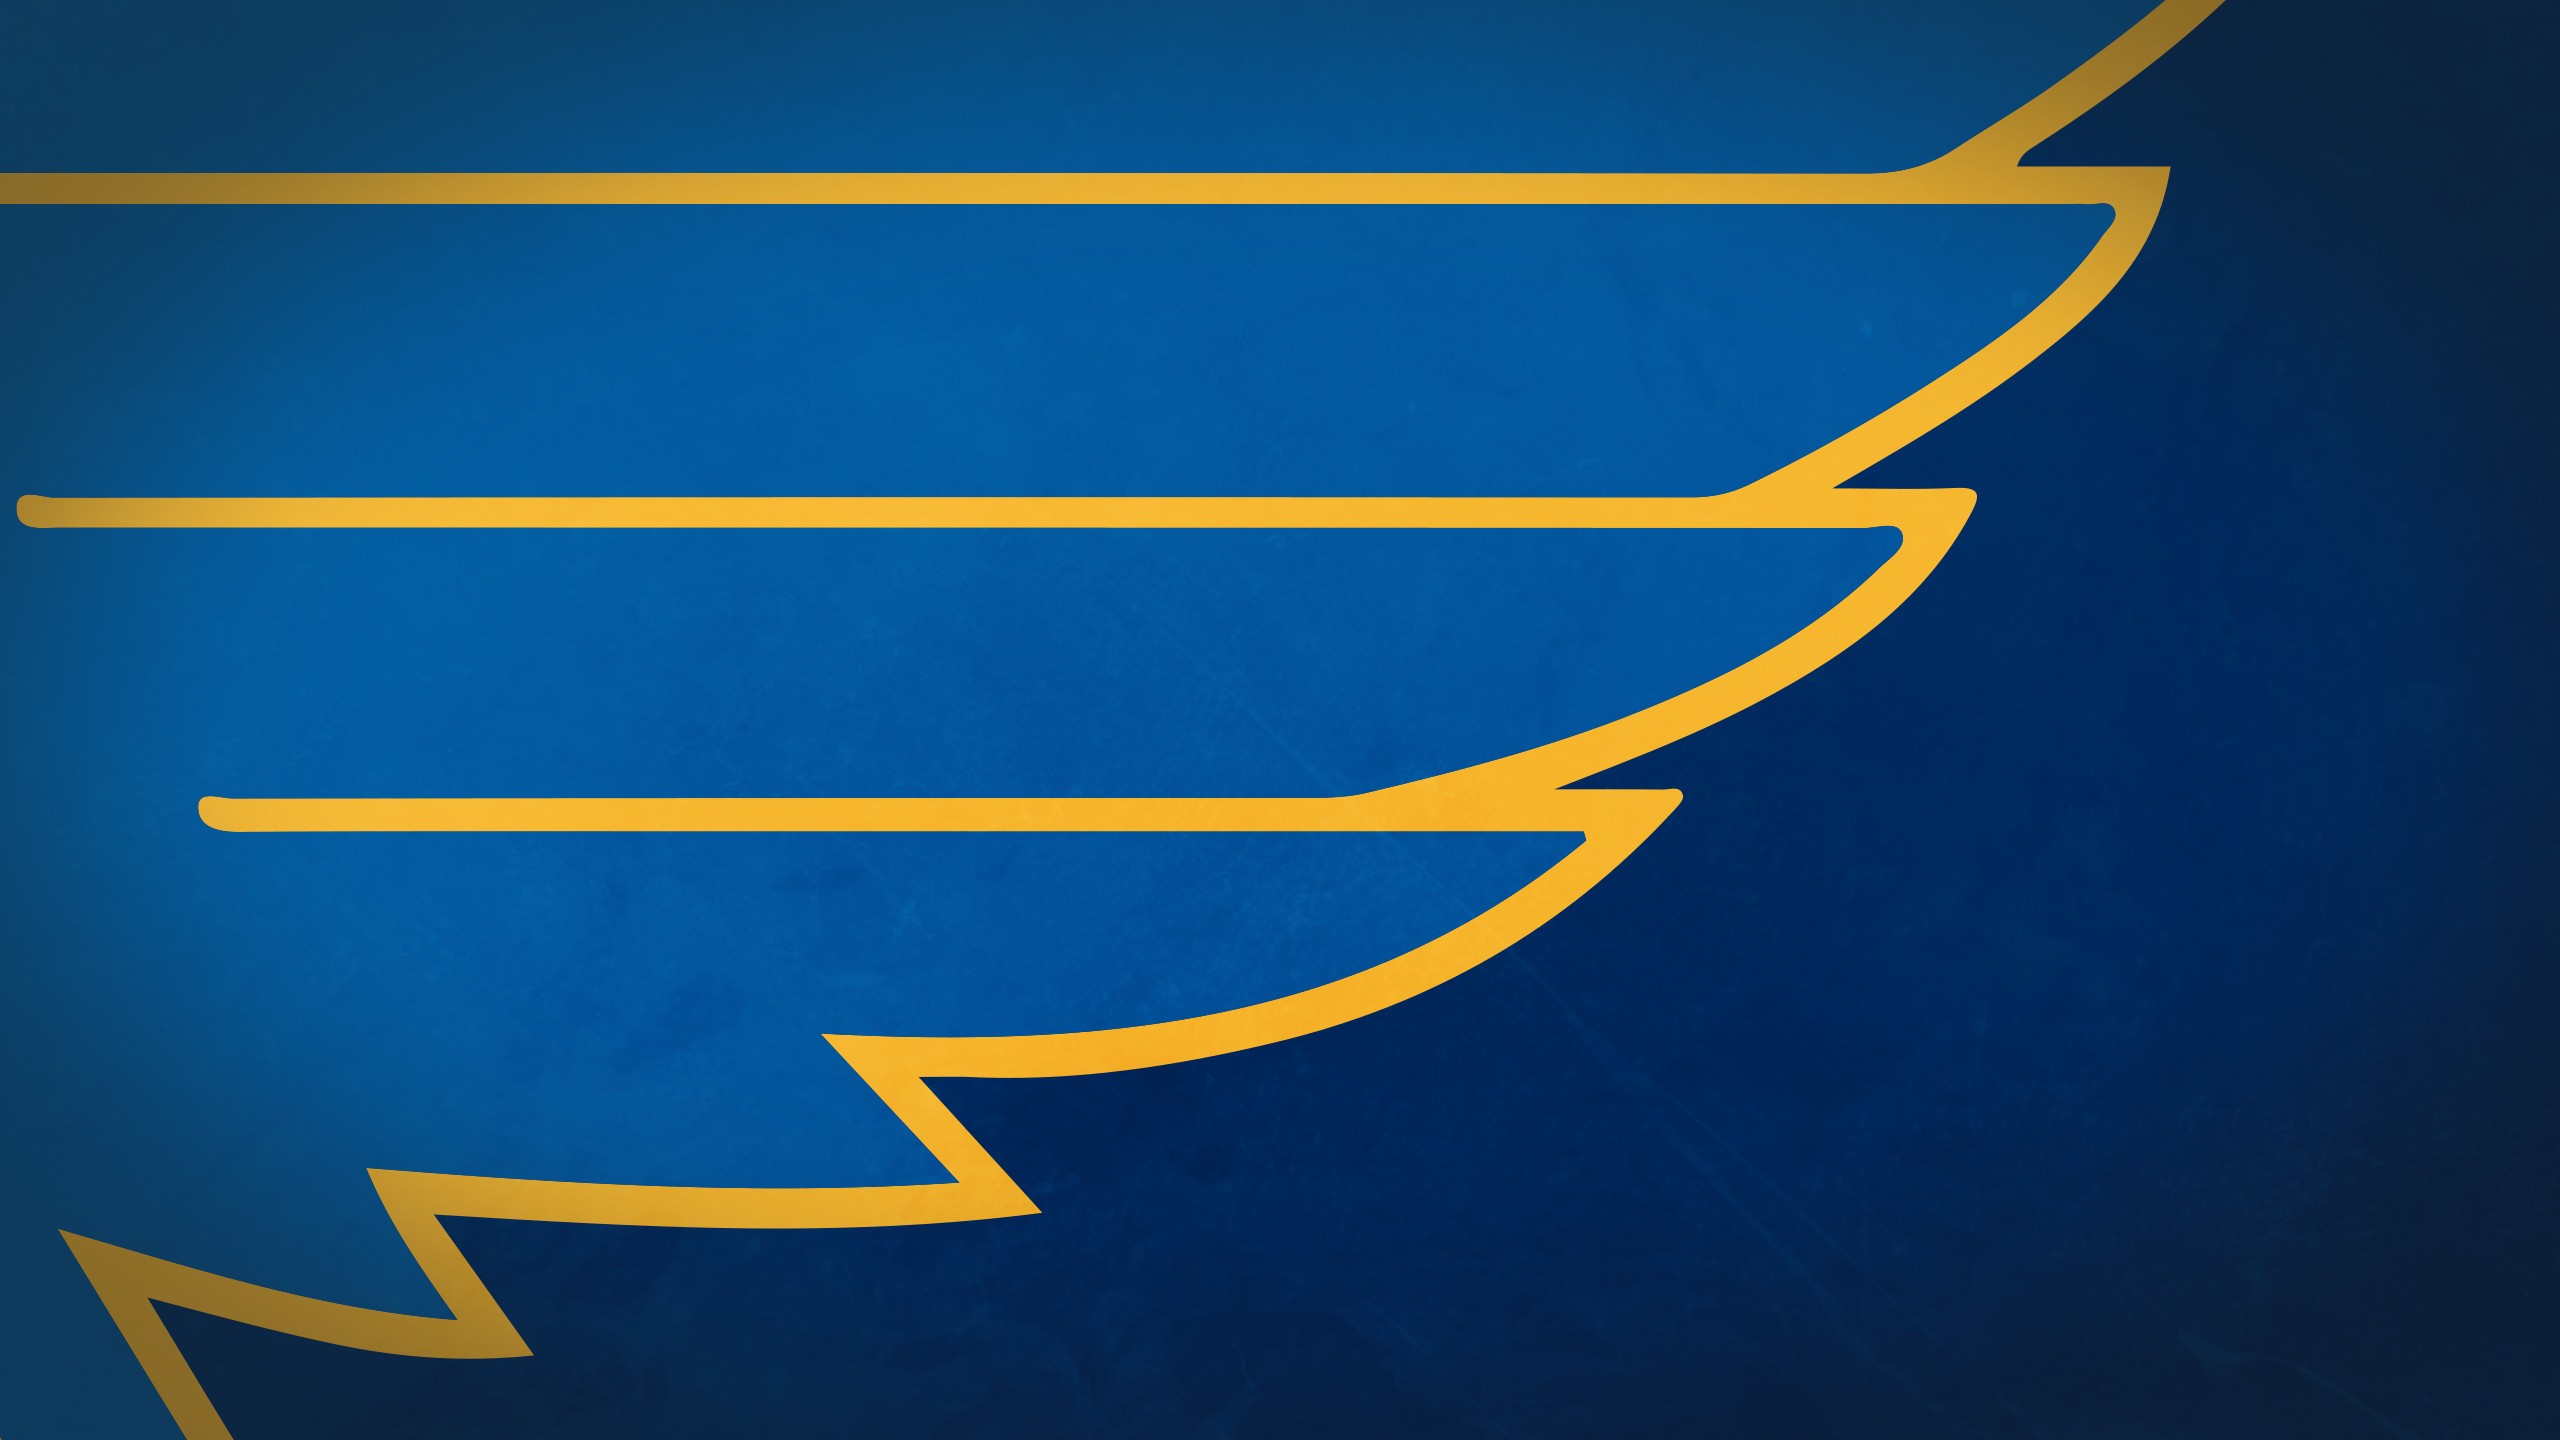 Download St Louis Blues wallpapers for mobile phone, free St